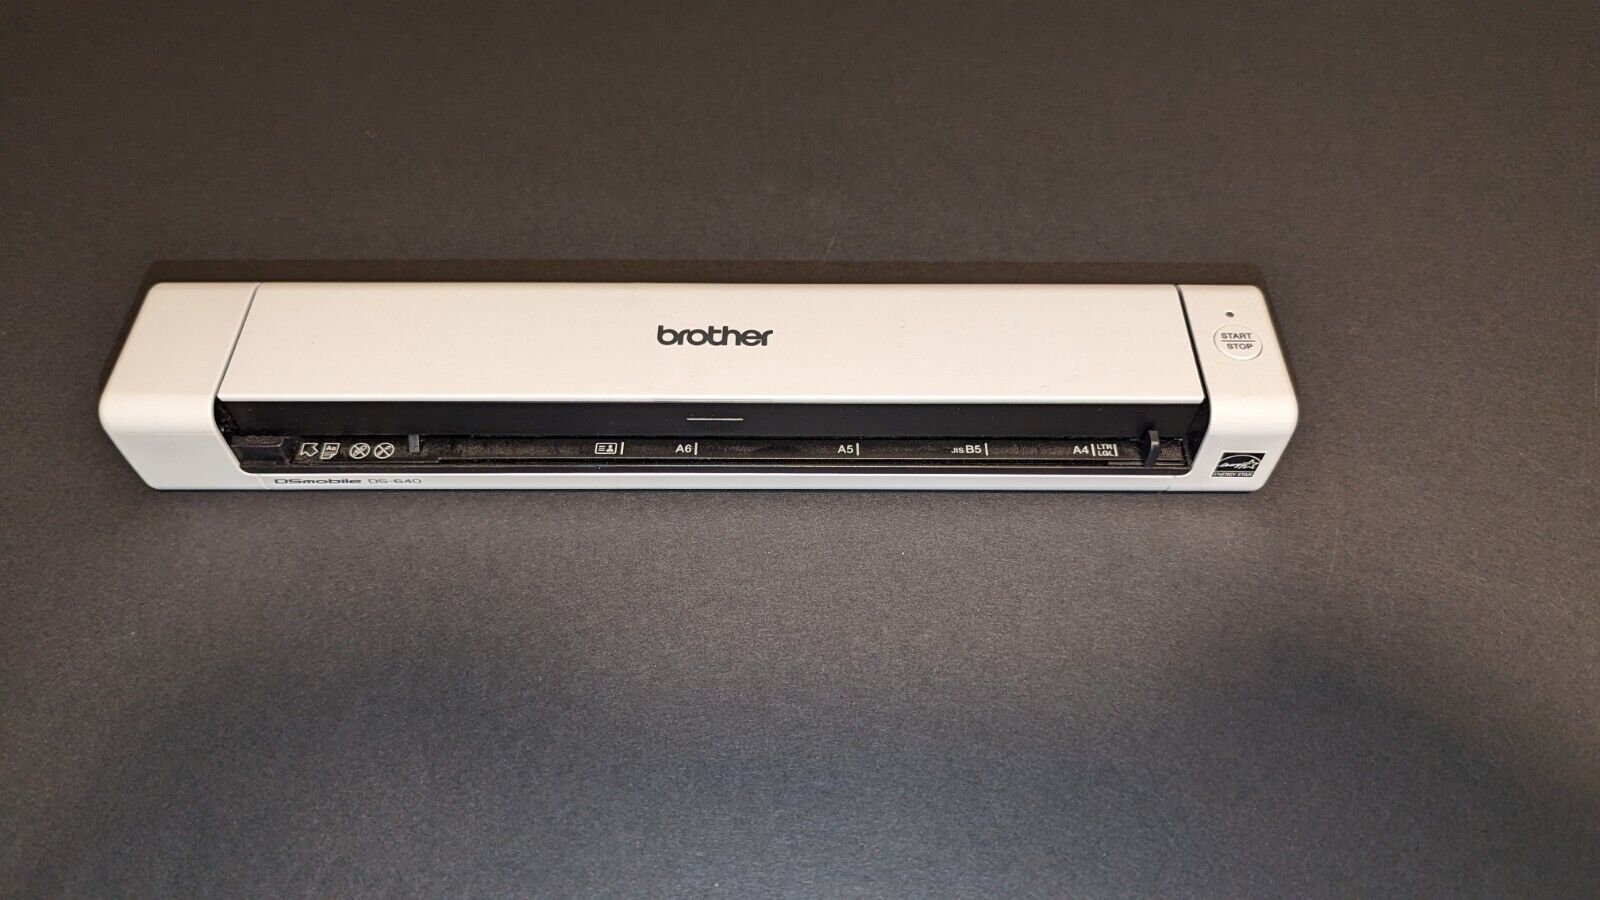 Brother DS-640 DSMobile Portable Document Scanner 16ppm, with USB Cable, Tested